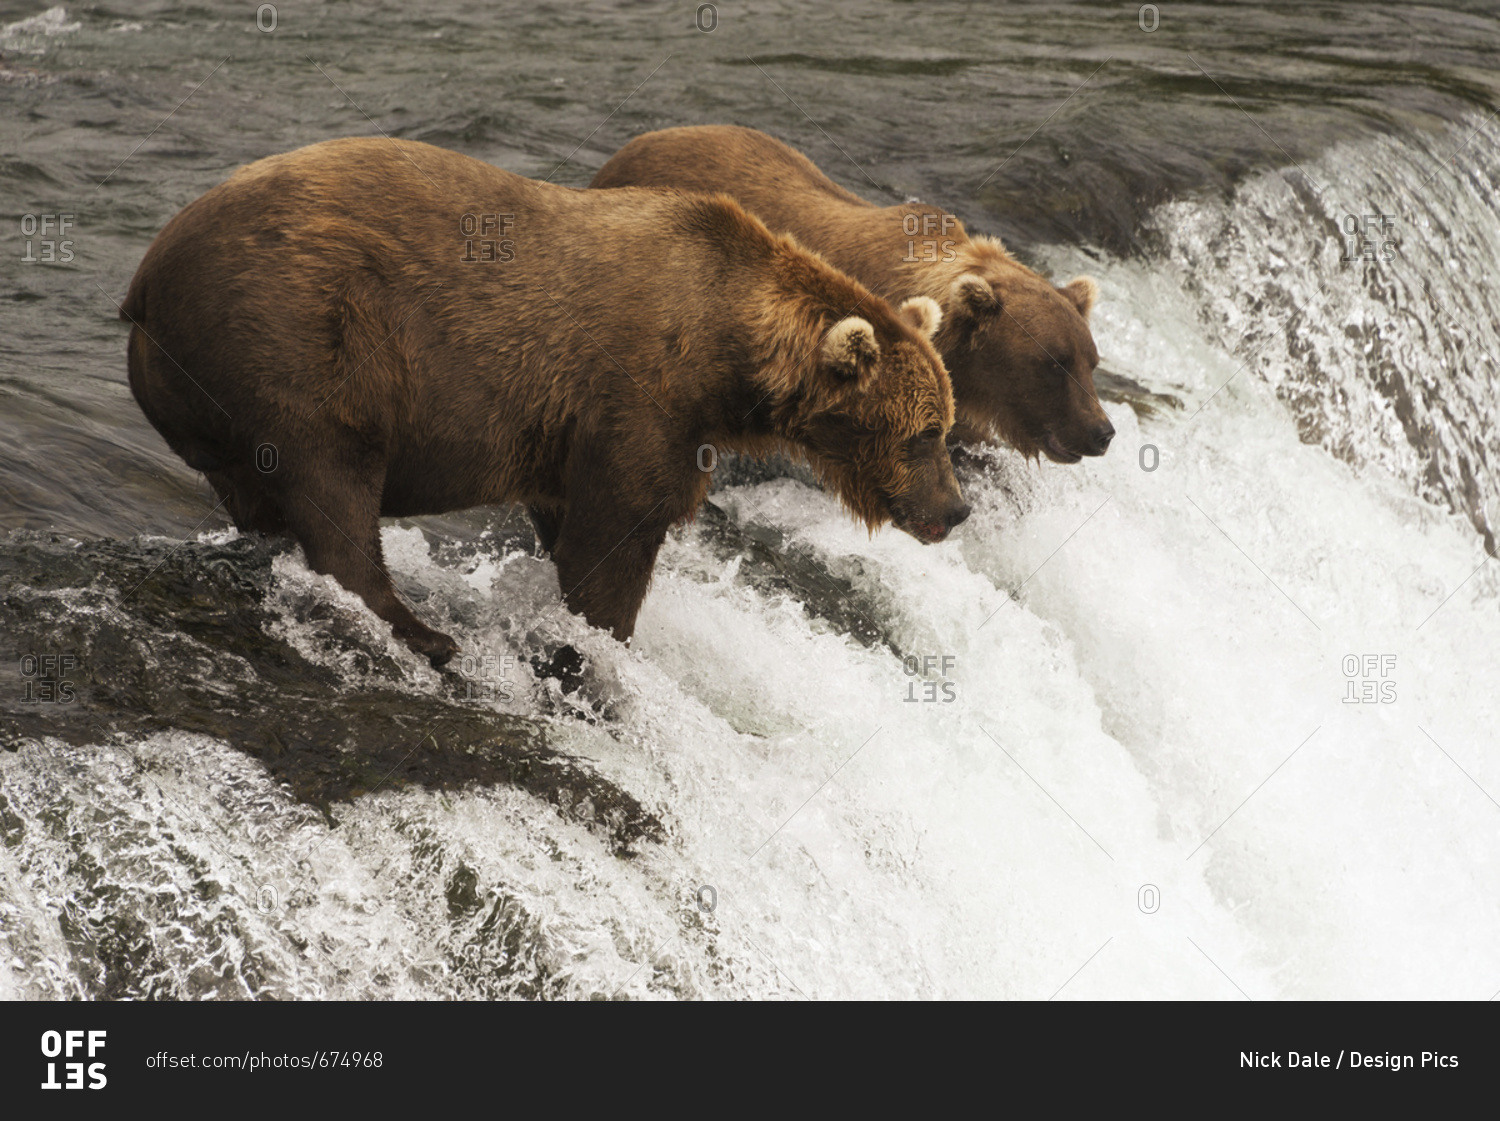 Alaska, United States of America - July 29, 2015: Two Brown Bears (Ursus Arctos) Staring Intently At The Water From The Top Of Brooks Falls, Waiting For Salmon To Jump; Alaska, United States Of America